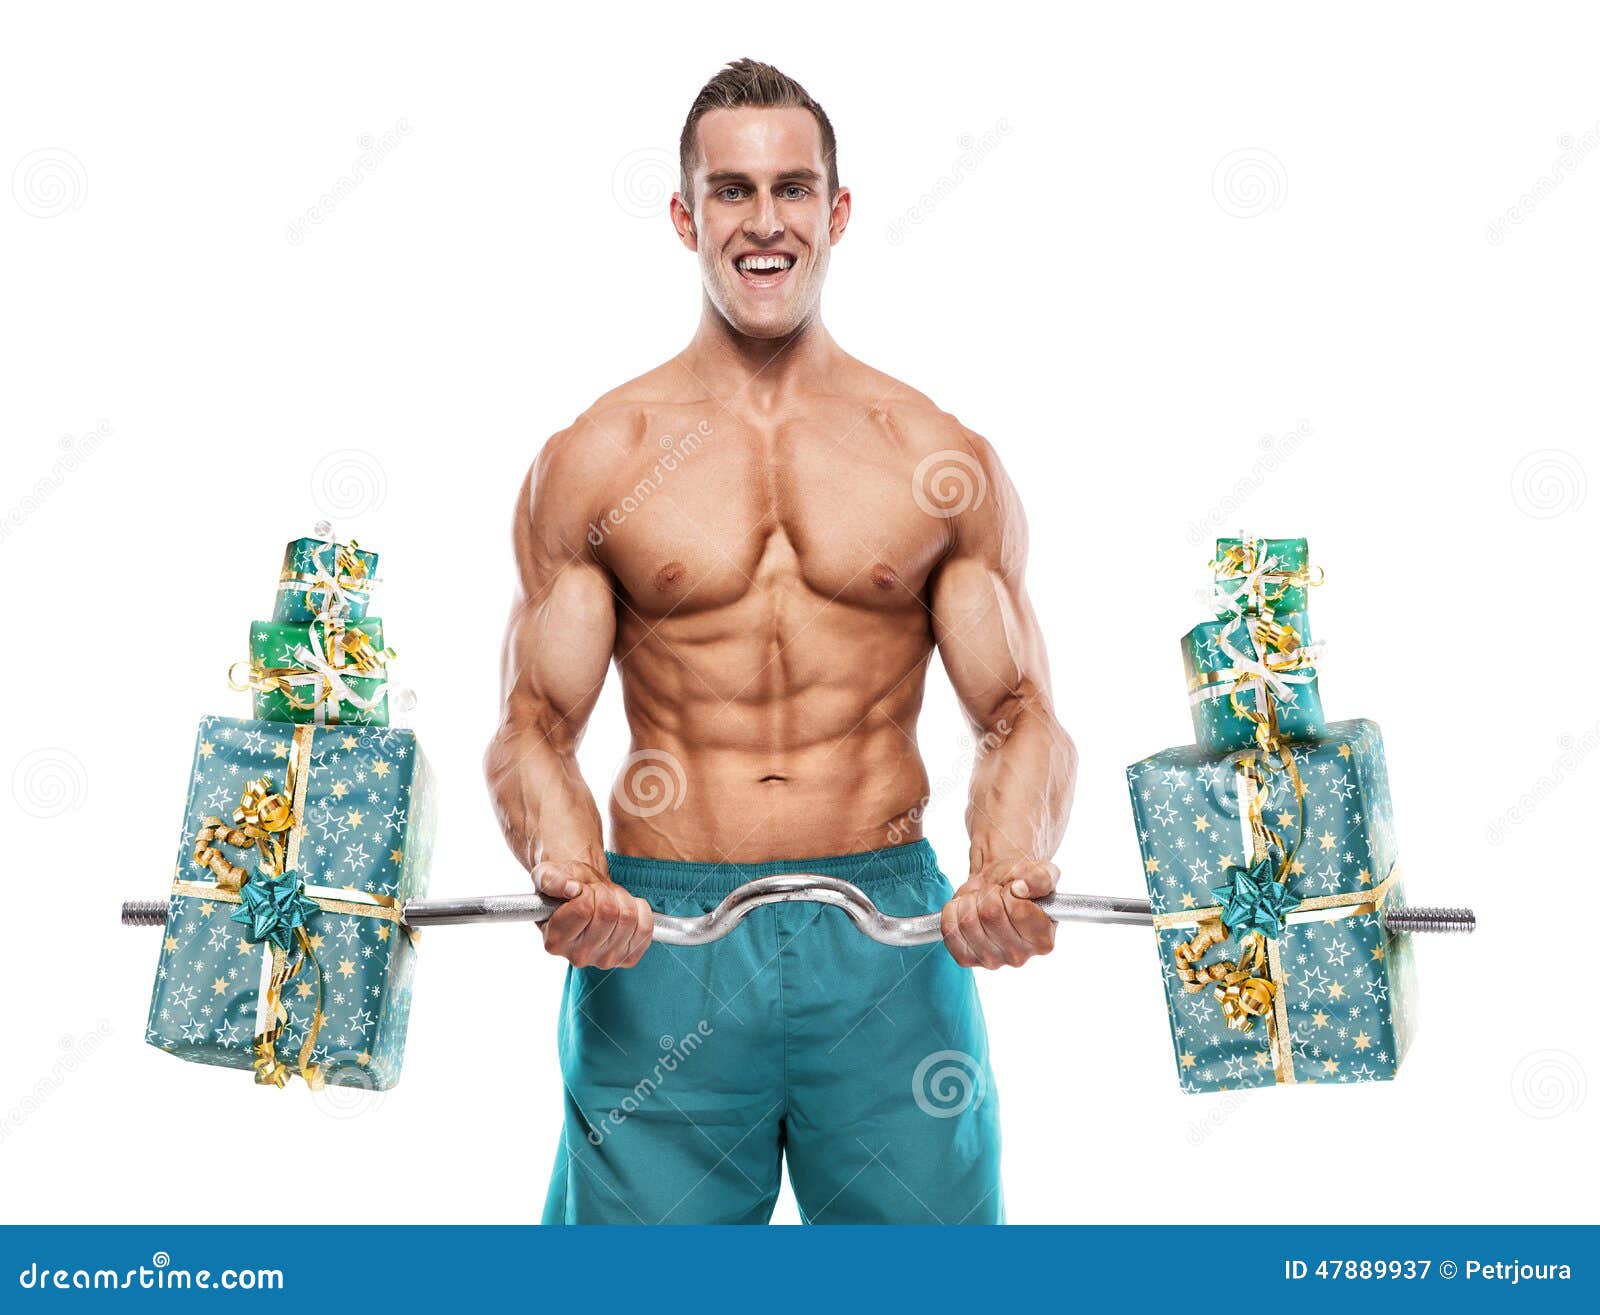 Muscular Bodybuilder Guy Doing Exercises with Gifts Over White B